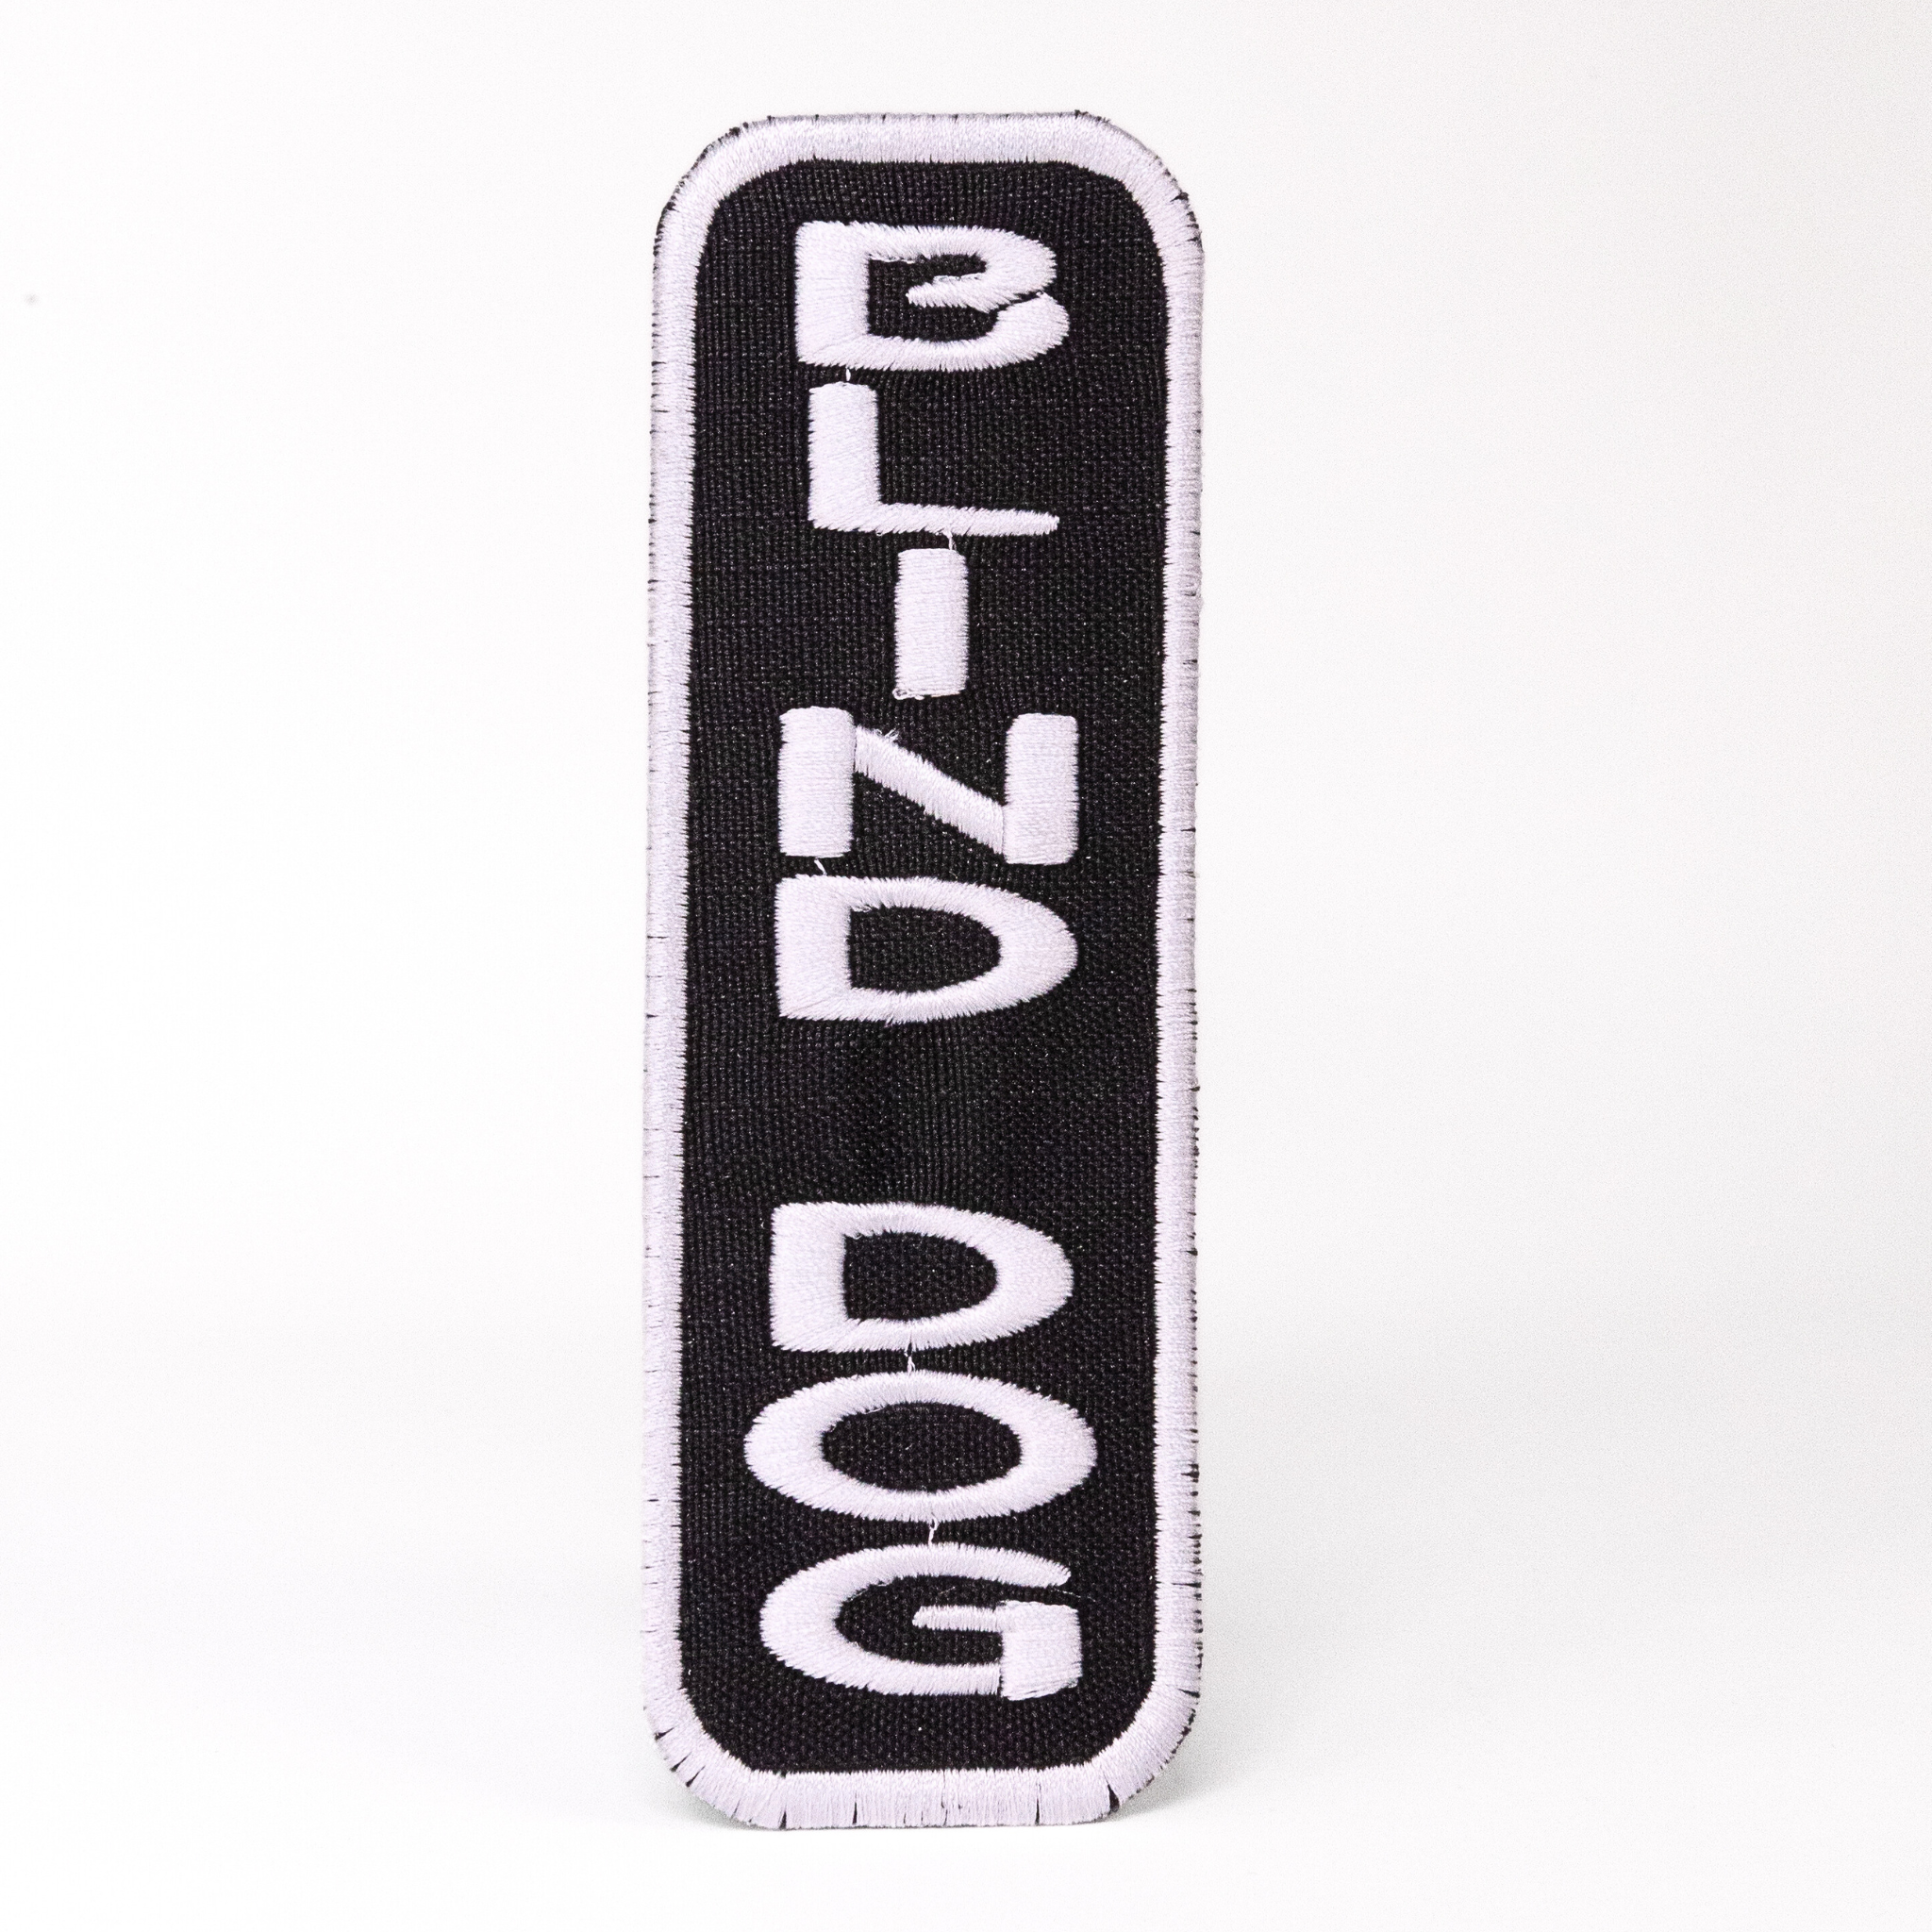 Blind Dog 2x6 Patch